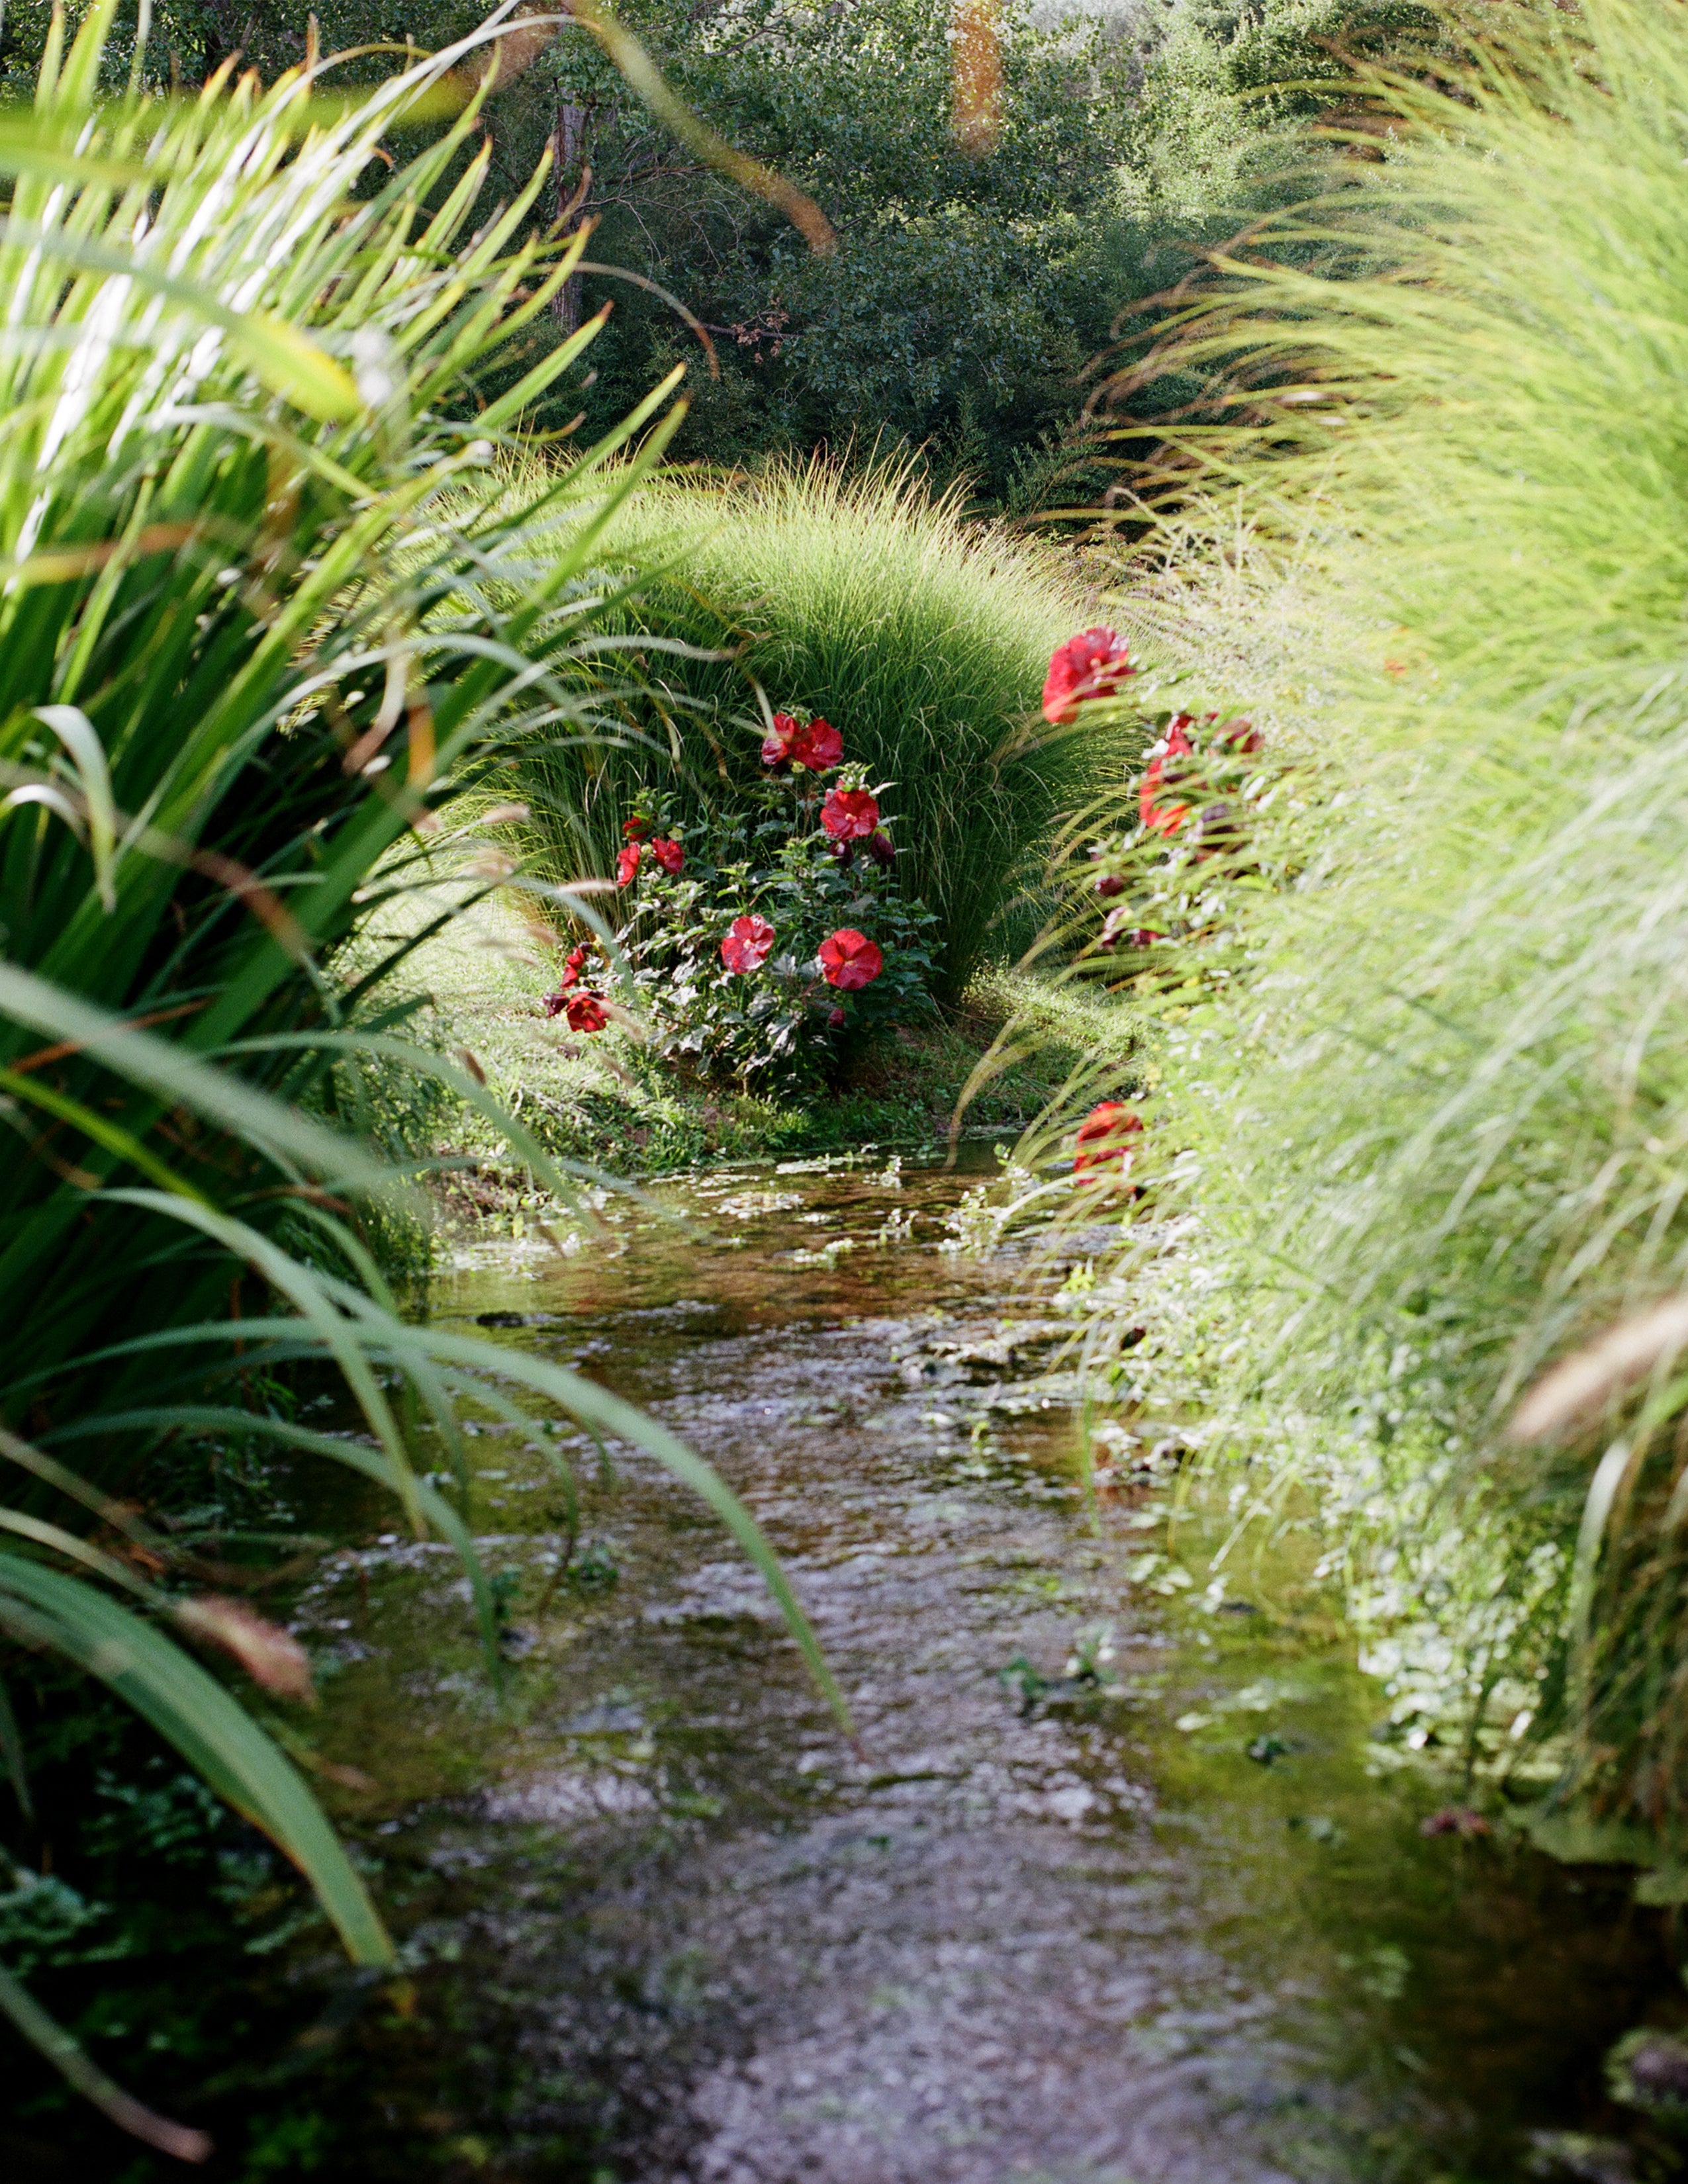 A stream covered by long grasses along two sides with some red flowers.